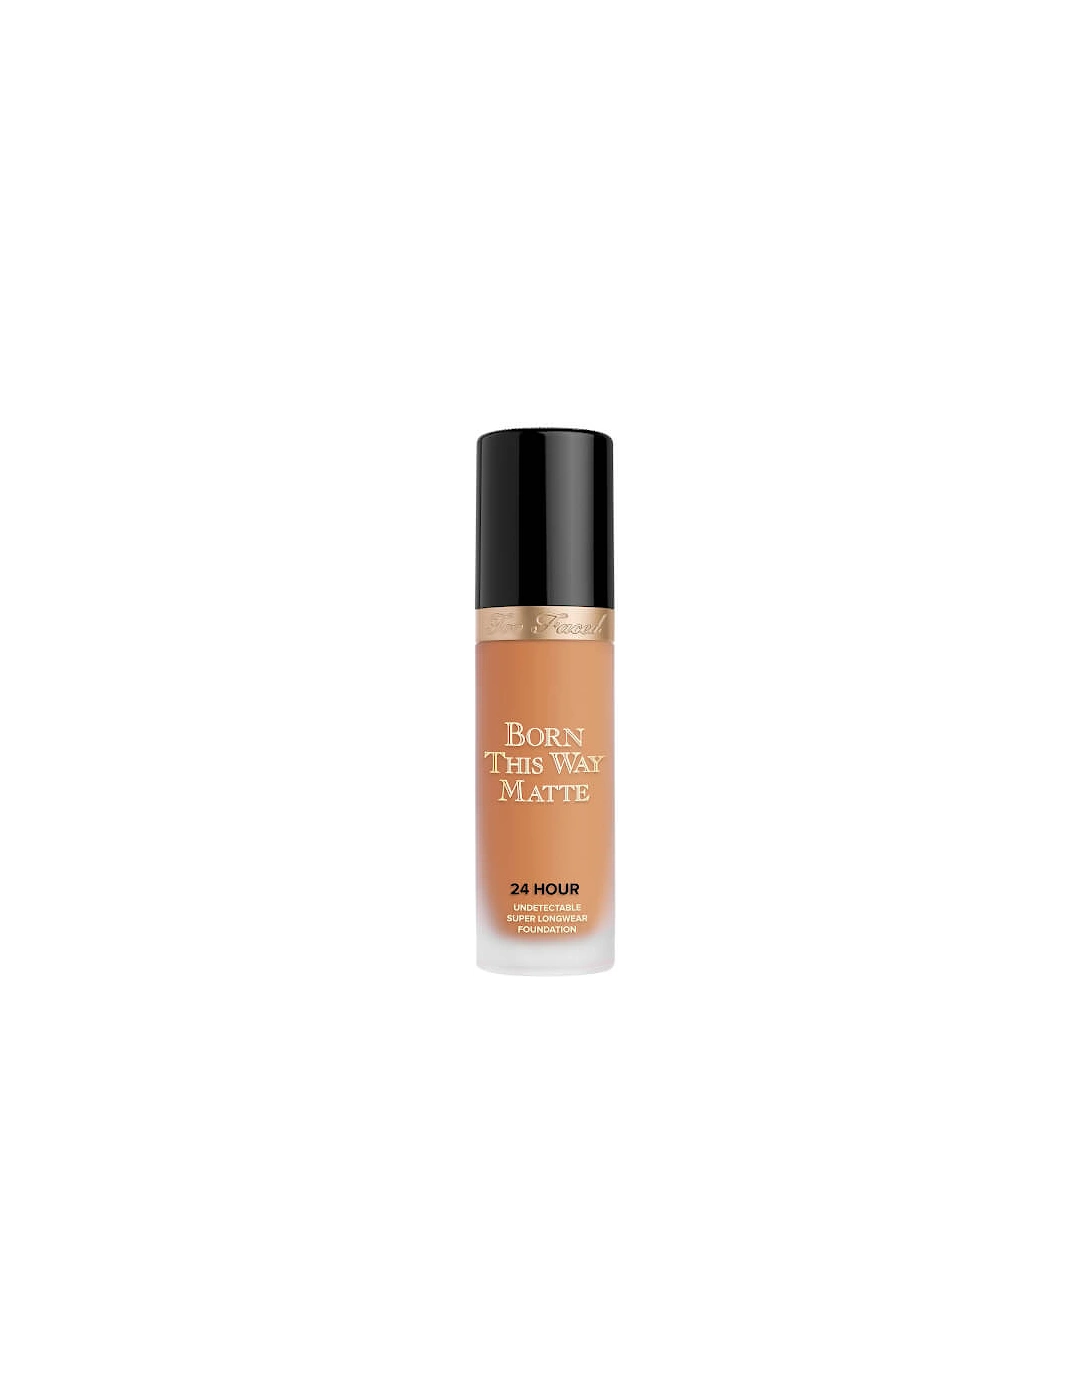 Born This Way Matte 24 Hour Long-Wear Foundation - Mocha, 2 of 1